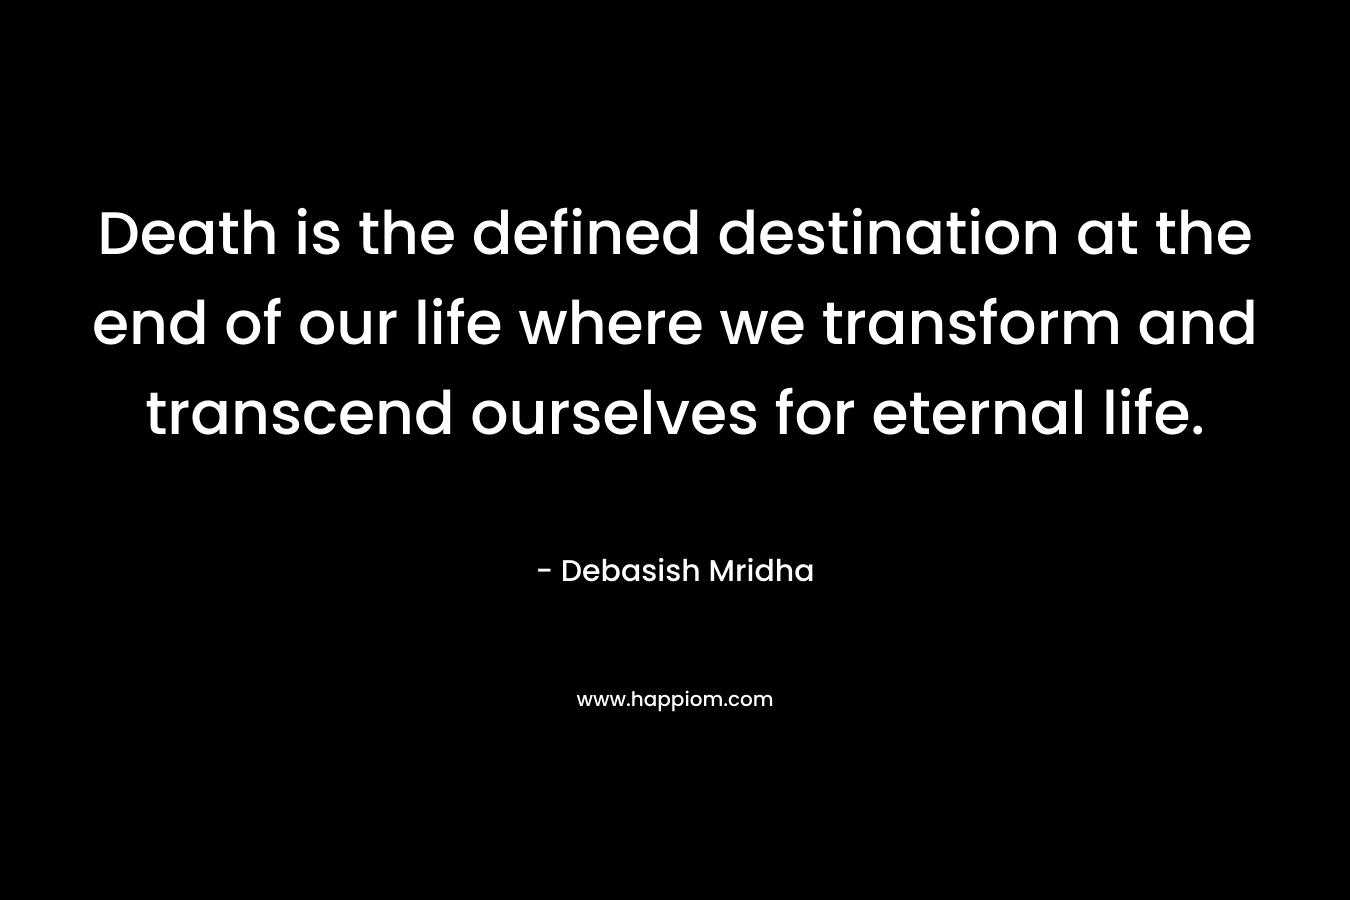 Death is the defined destination at the end of our life where we transform and transcend ourselves for eternal life.